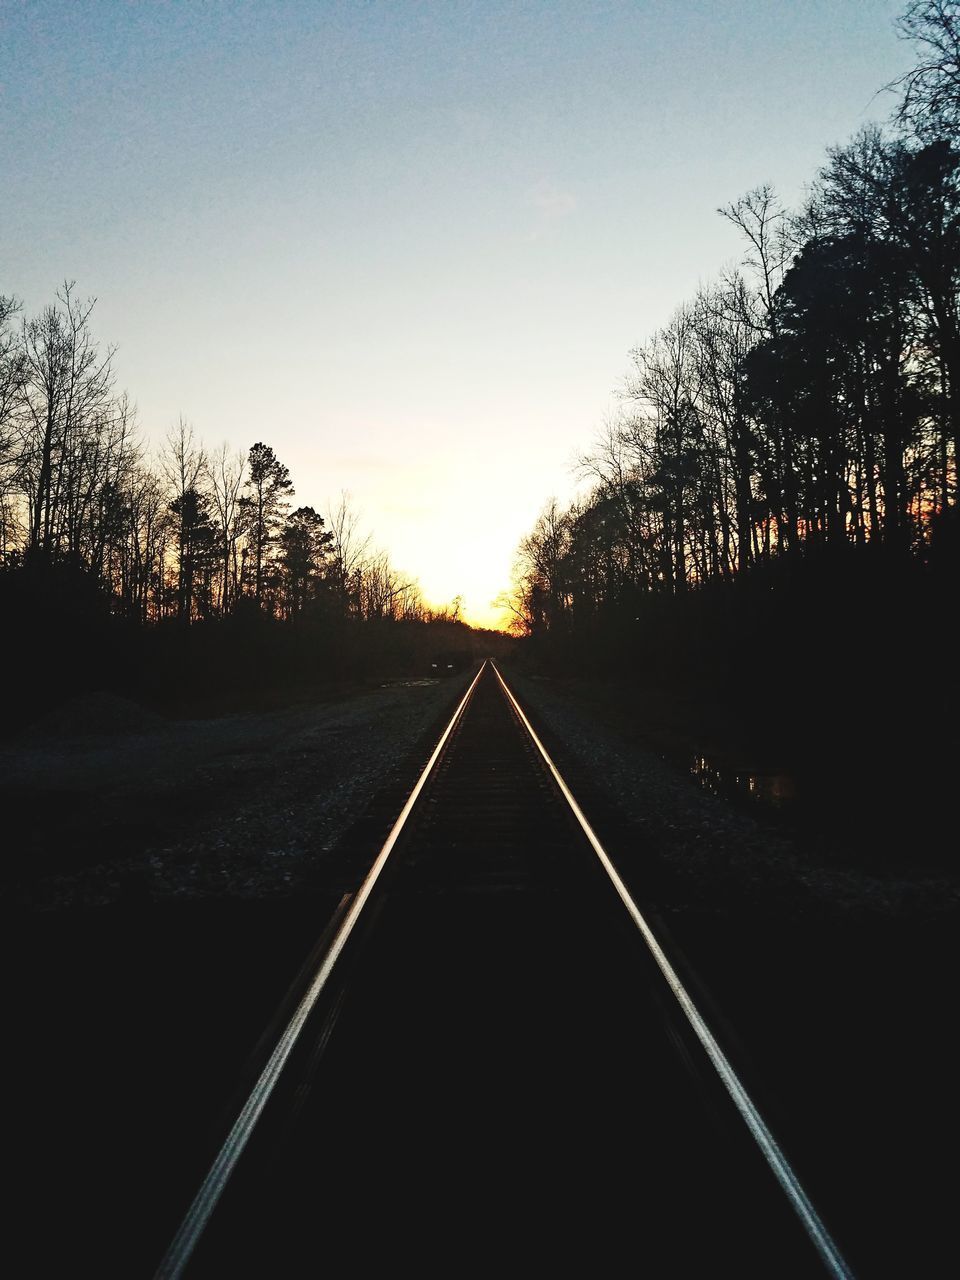 VIEW OF RAILROAD TRACK AGAINST SKY